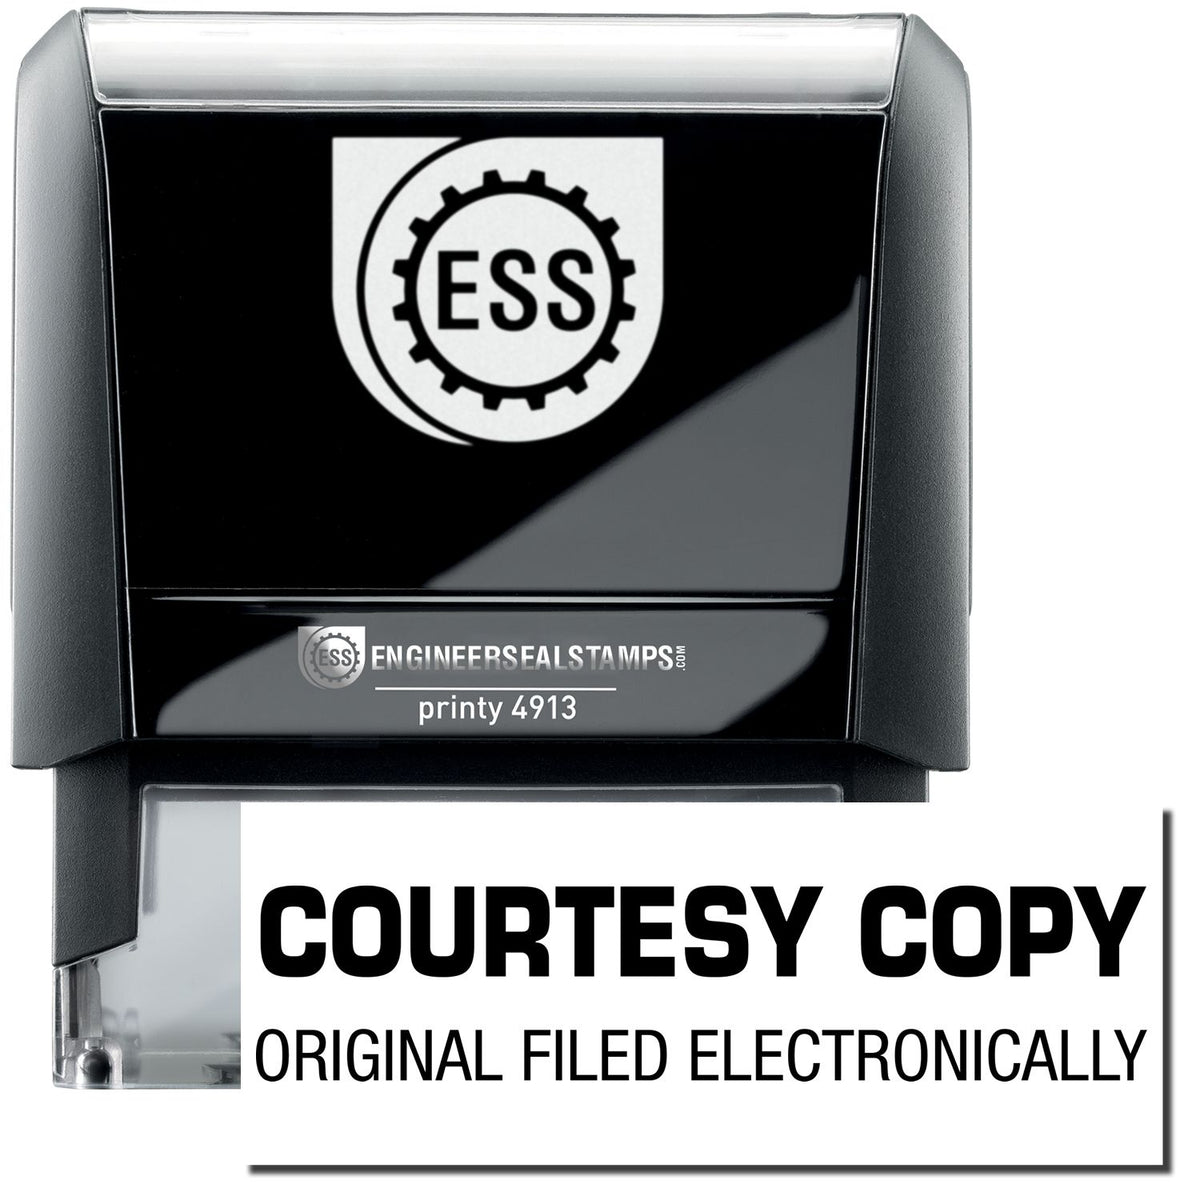 A self-inking stamp with a stamped image showing how the texts &quot;COURTESY COPY&quot; in a large bold font and &quot;ORIGINAL FILED ELECTRONICALLY&quot; mentioned under it is displayed after stamping.